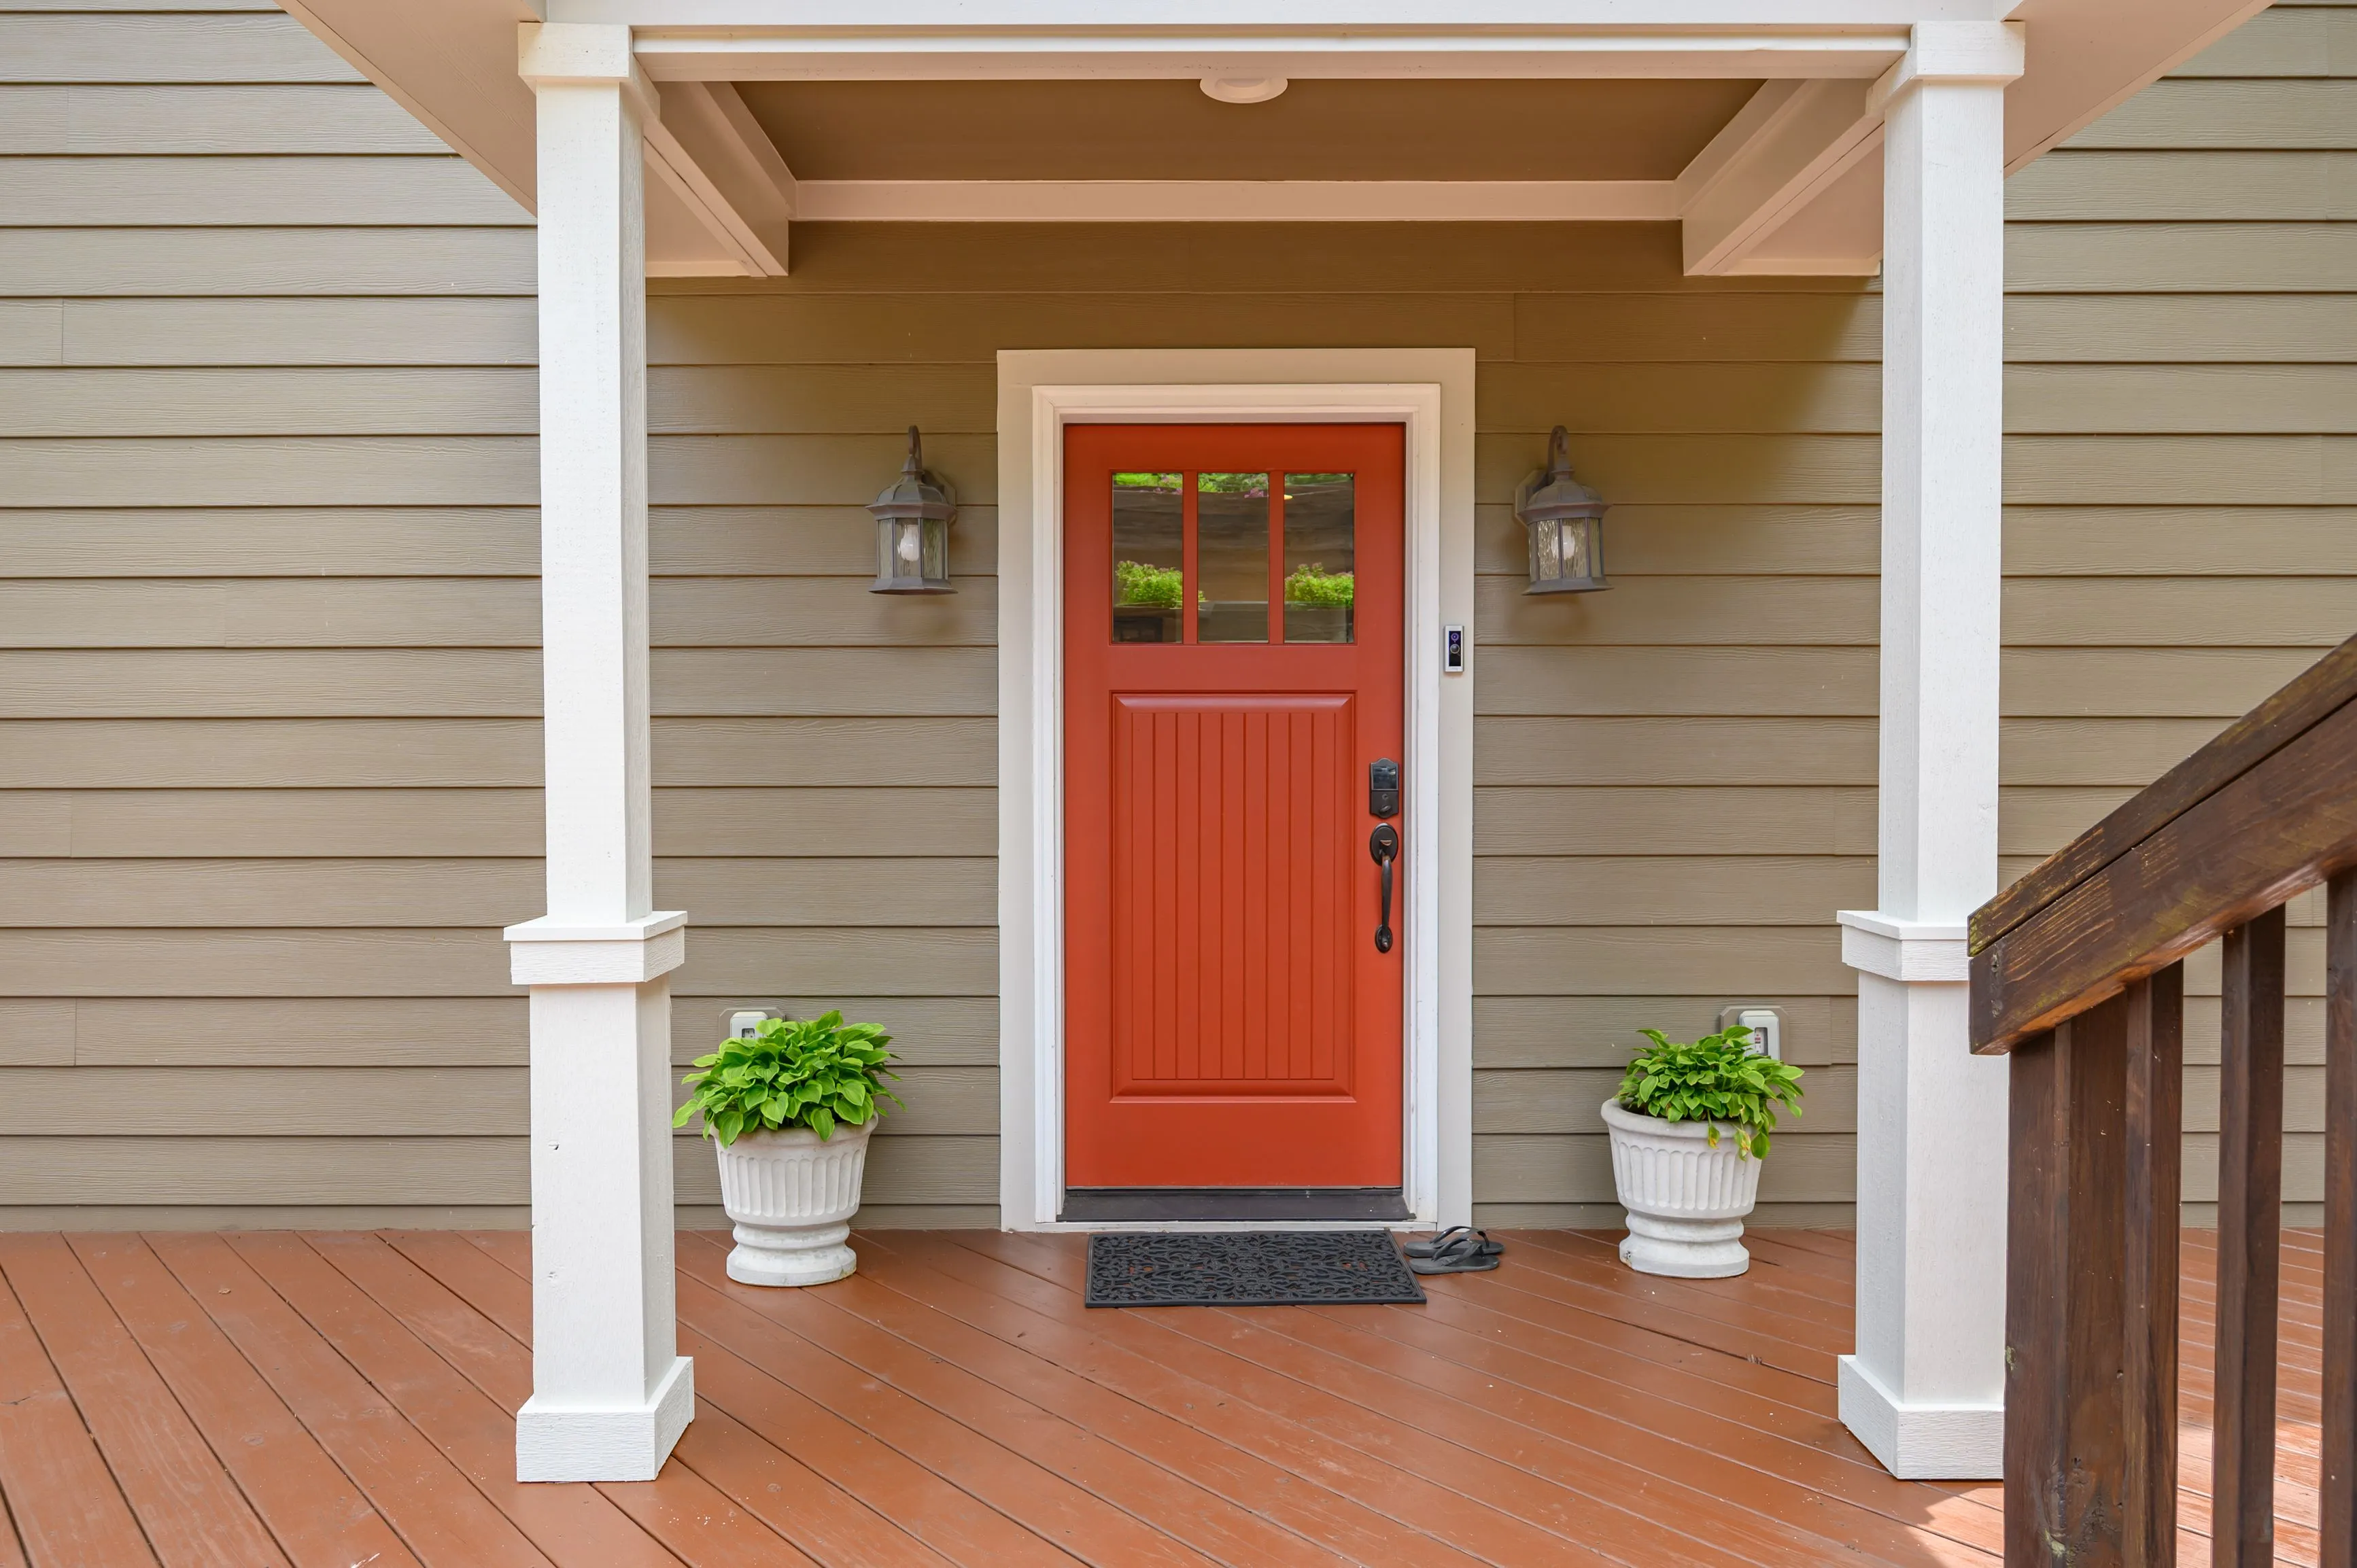 Front porch of a house with a red door, white columns, potted plants, and wooden decking.